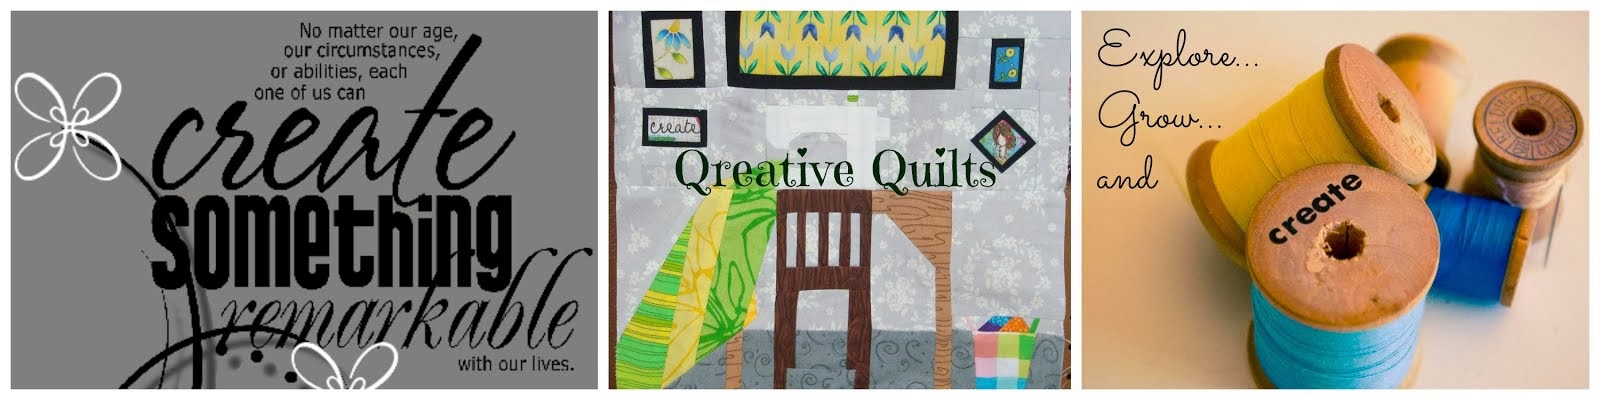 Qreative Quilts